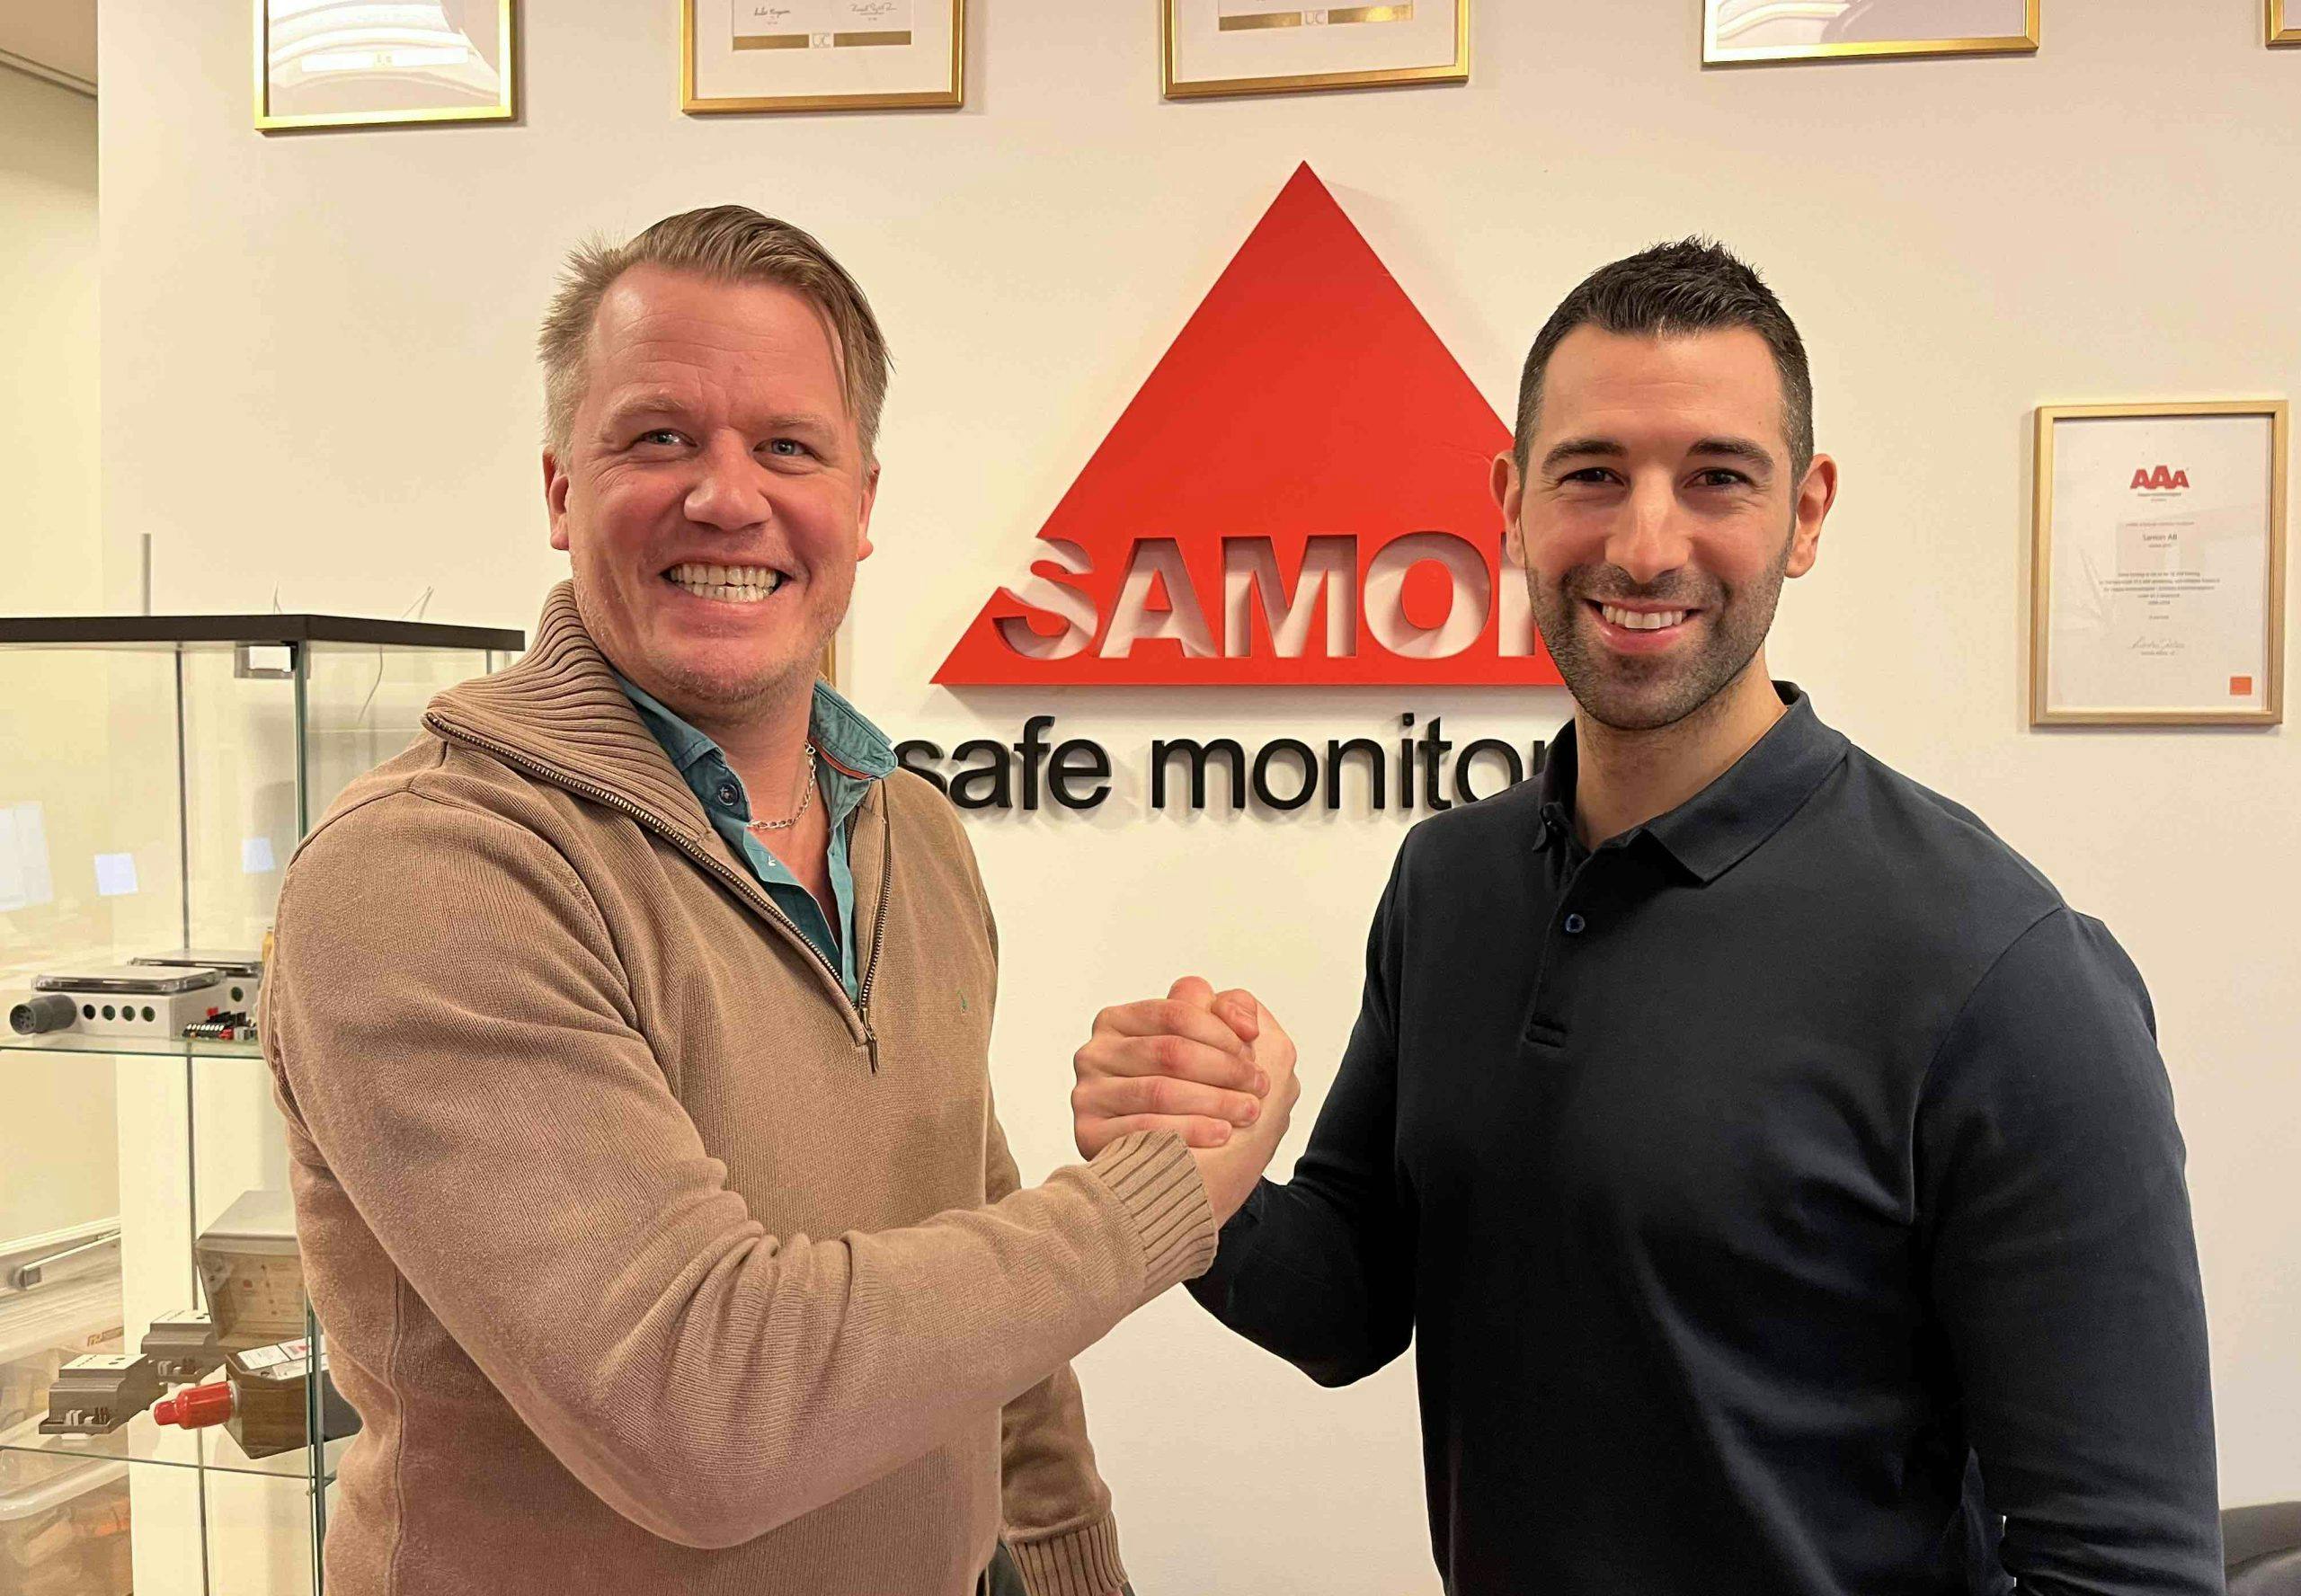 SAMON expands the sales team and welcomes Simon Benchimol as Sales Manager in the Swedish market.